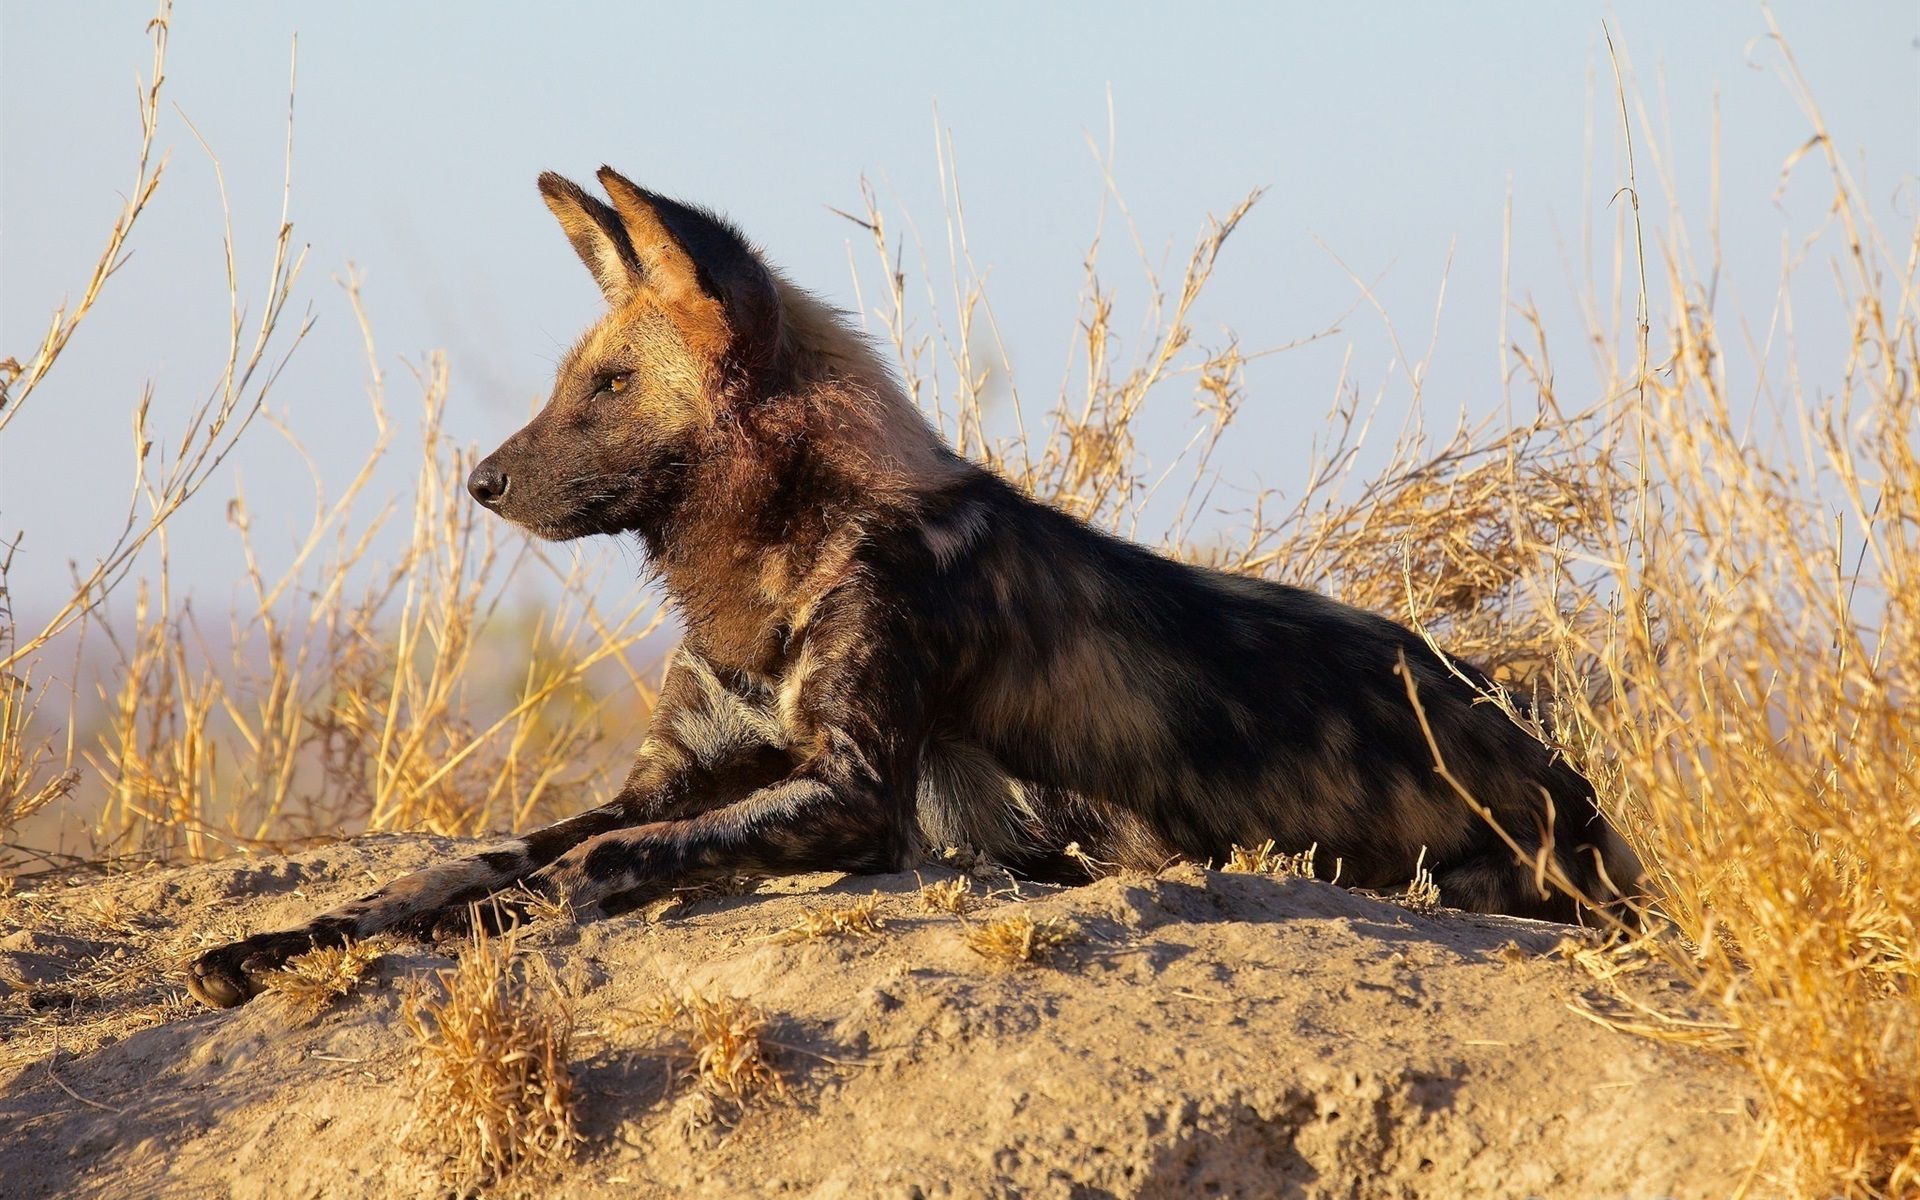 African Wild Dog Photography 640x1136 IPhone 5 5S 5C SE Wallpaper, Background, Picture, Image